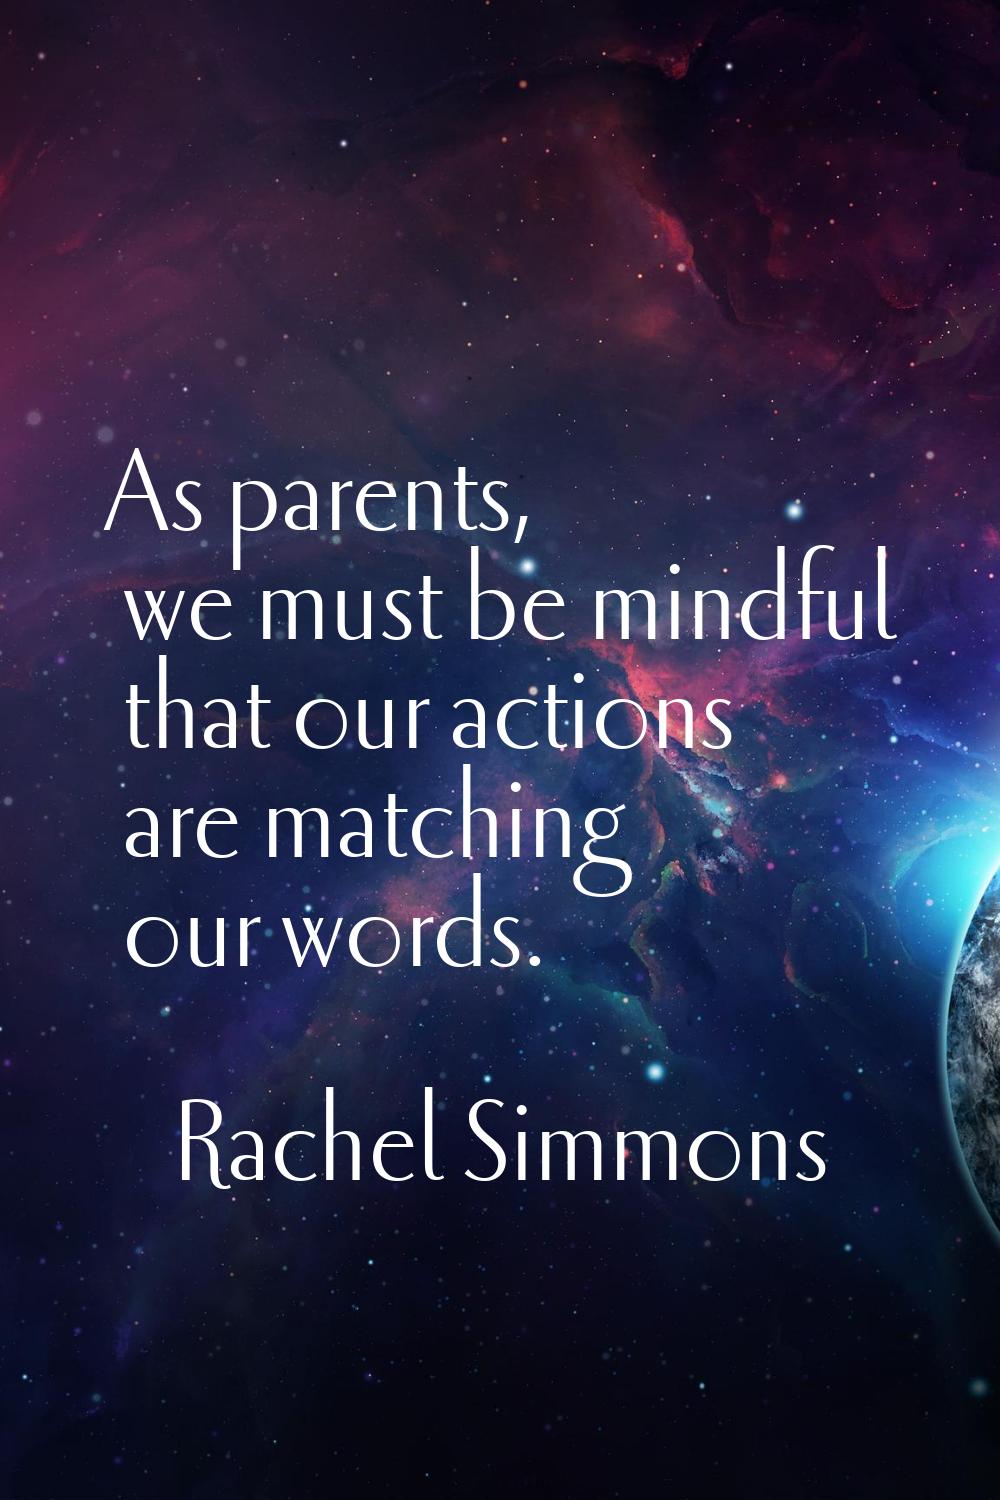 As parents, we must be mindful that our actions are matching our words.